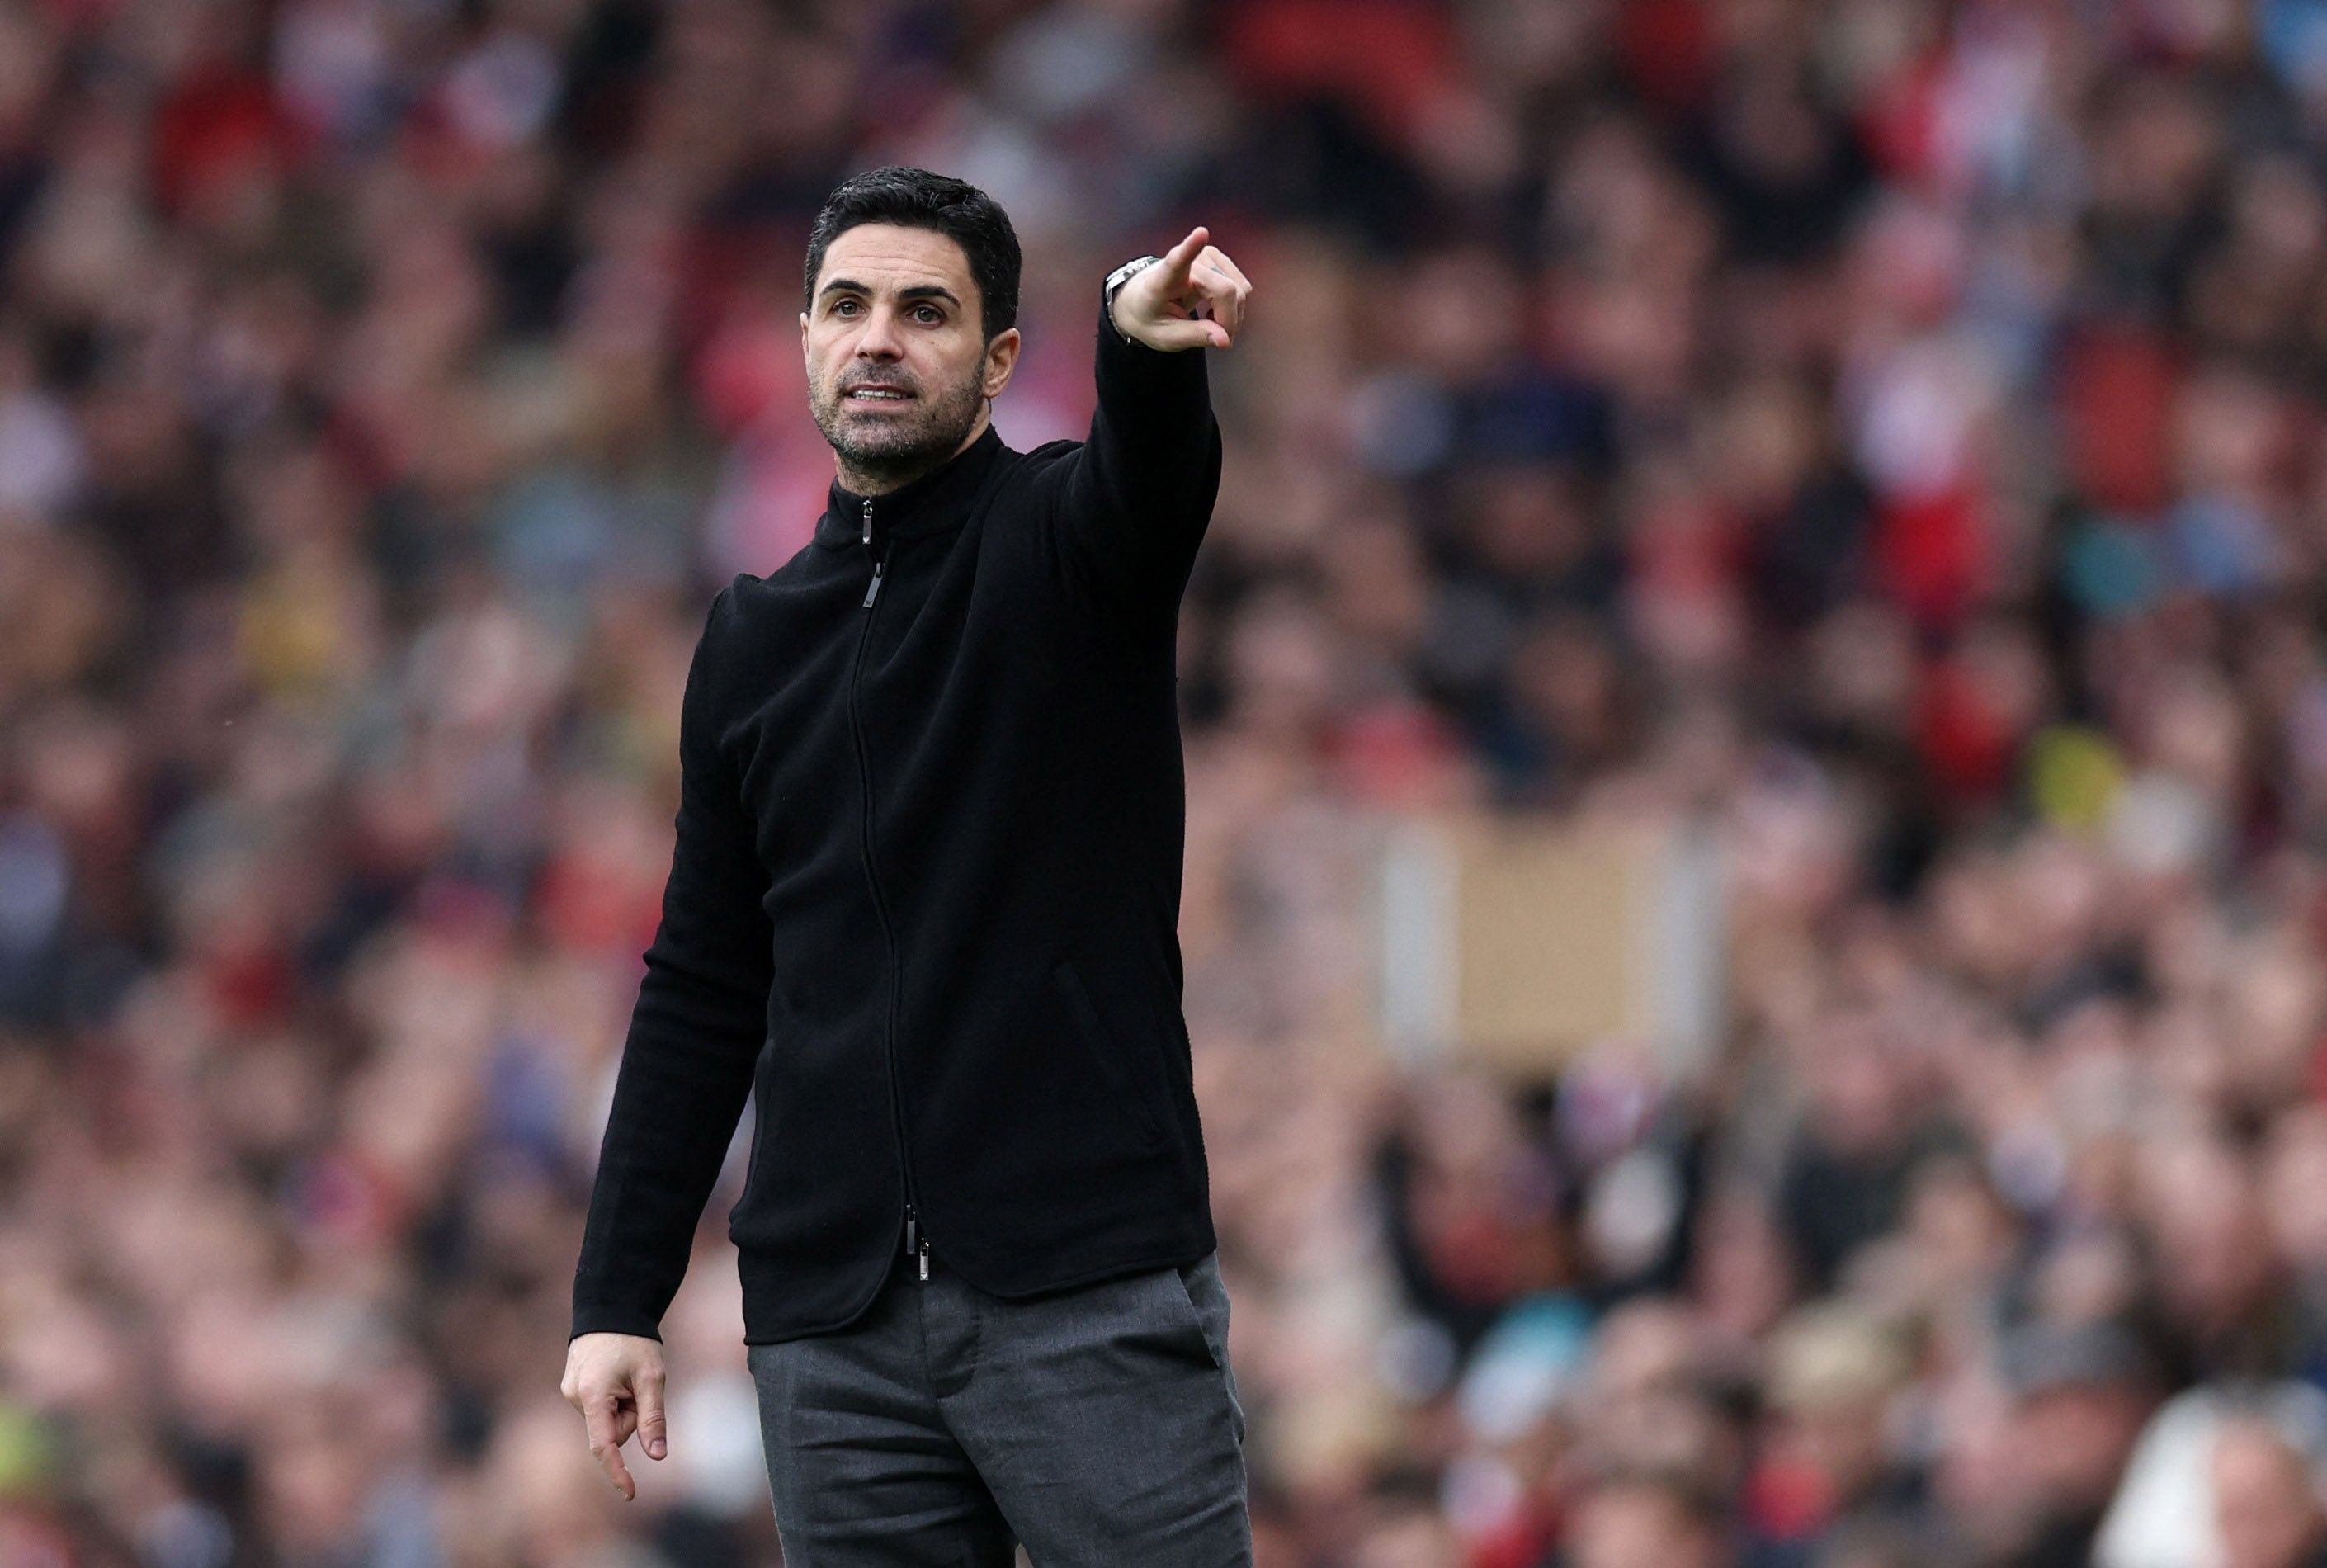 Arsenal manager Mikel Arteta pointing during Crystal Palace match